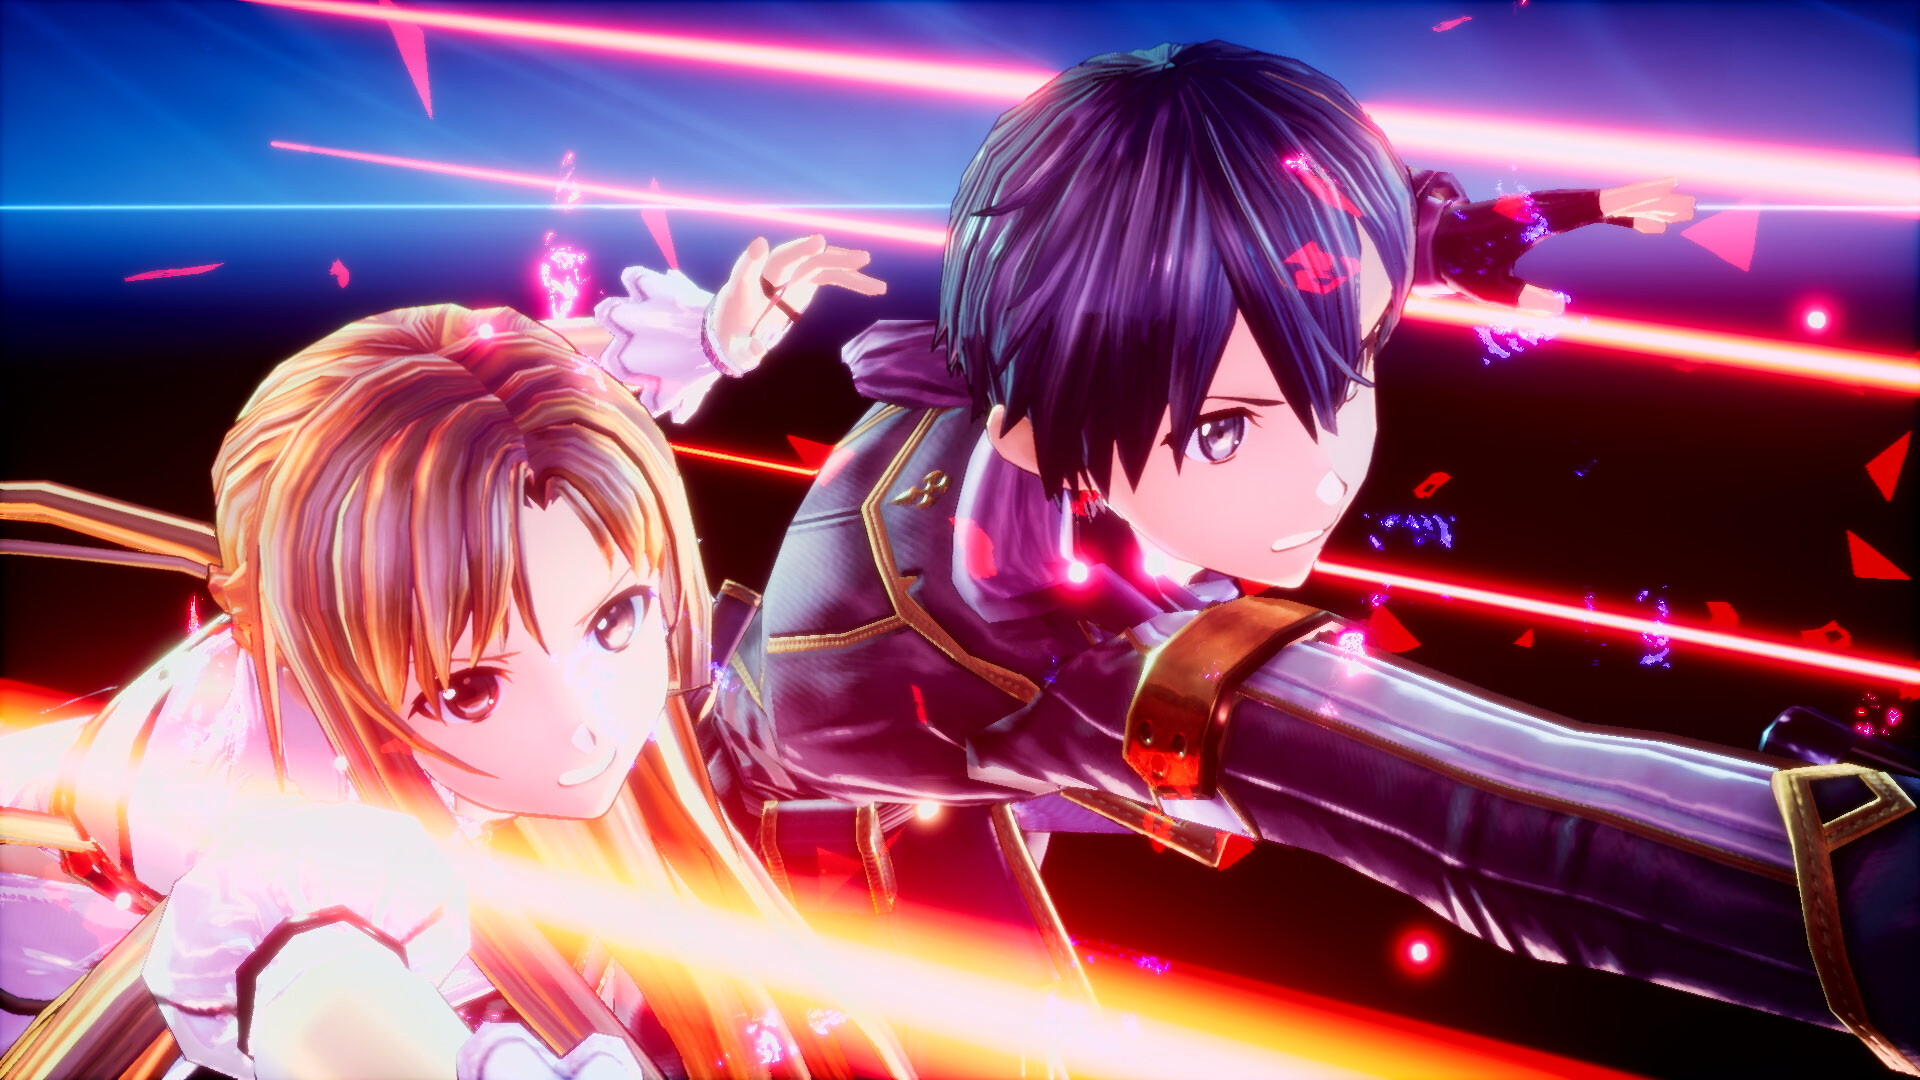 VR event Sword Art Online -EX-CHRONICLE- Online Edition Coming February 2022!  - NEWS